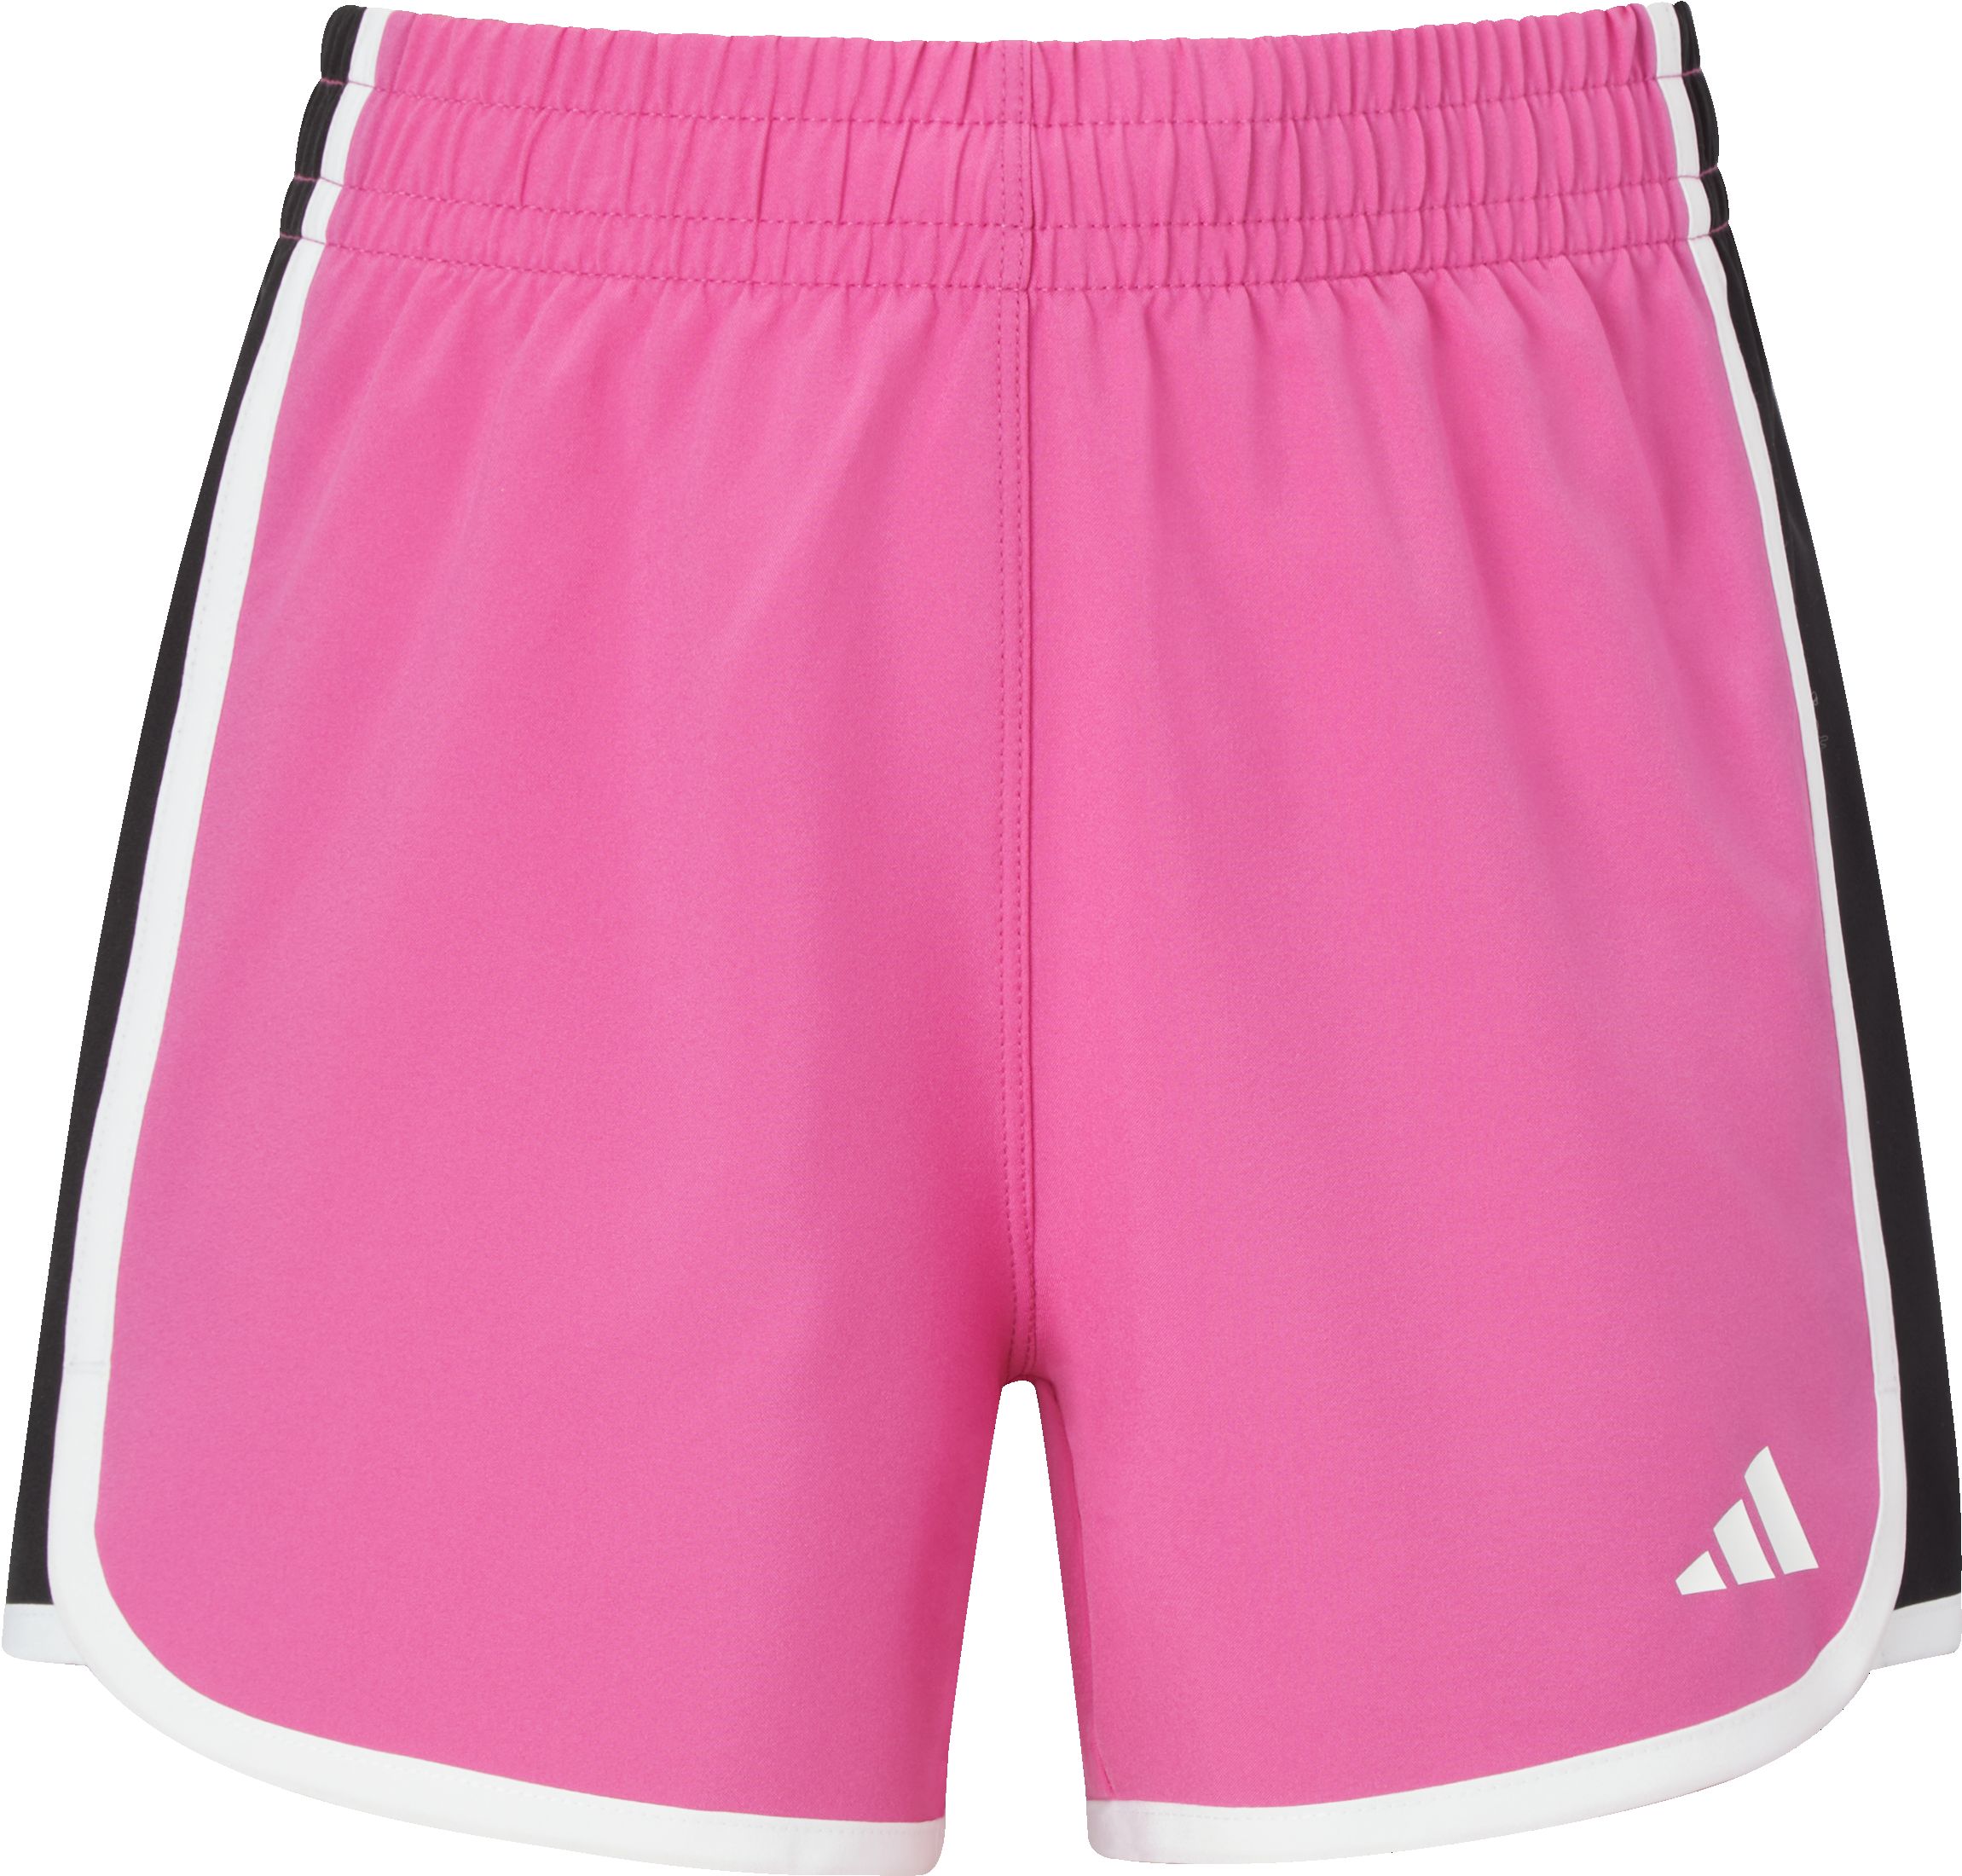 adidas Pacer 3-Stripes Woven Shorts - White | adidas Canada